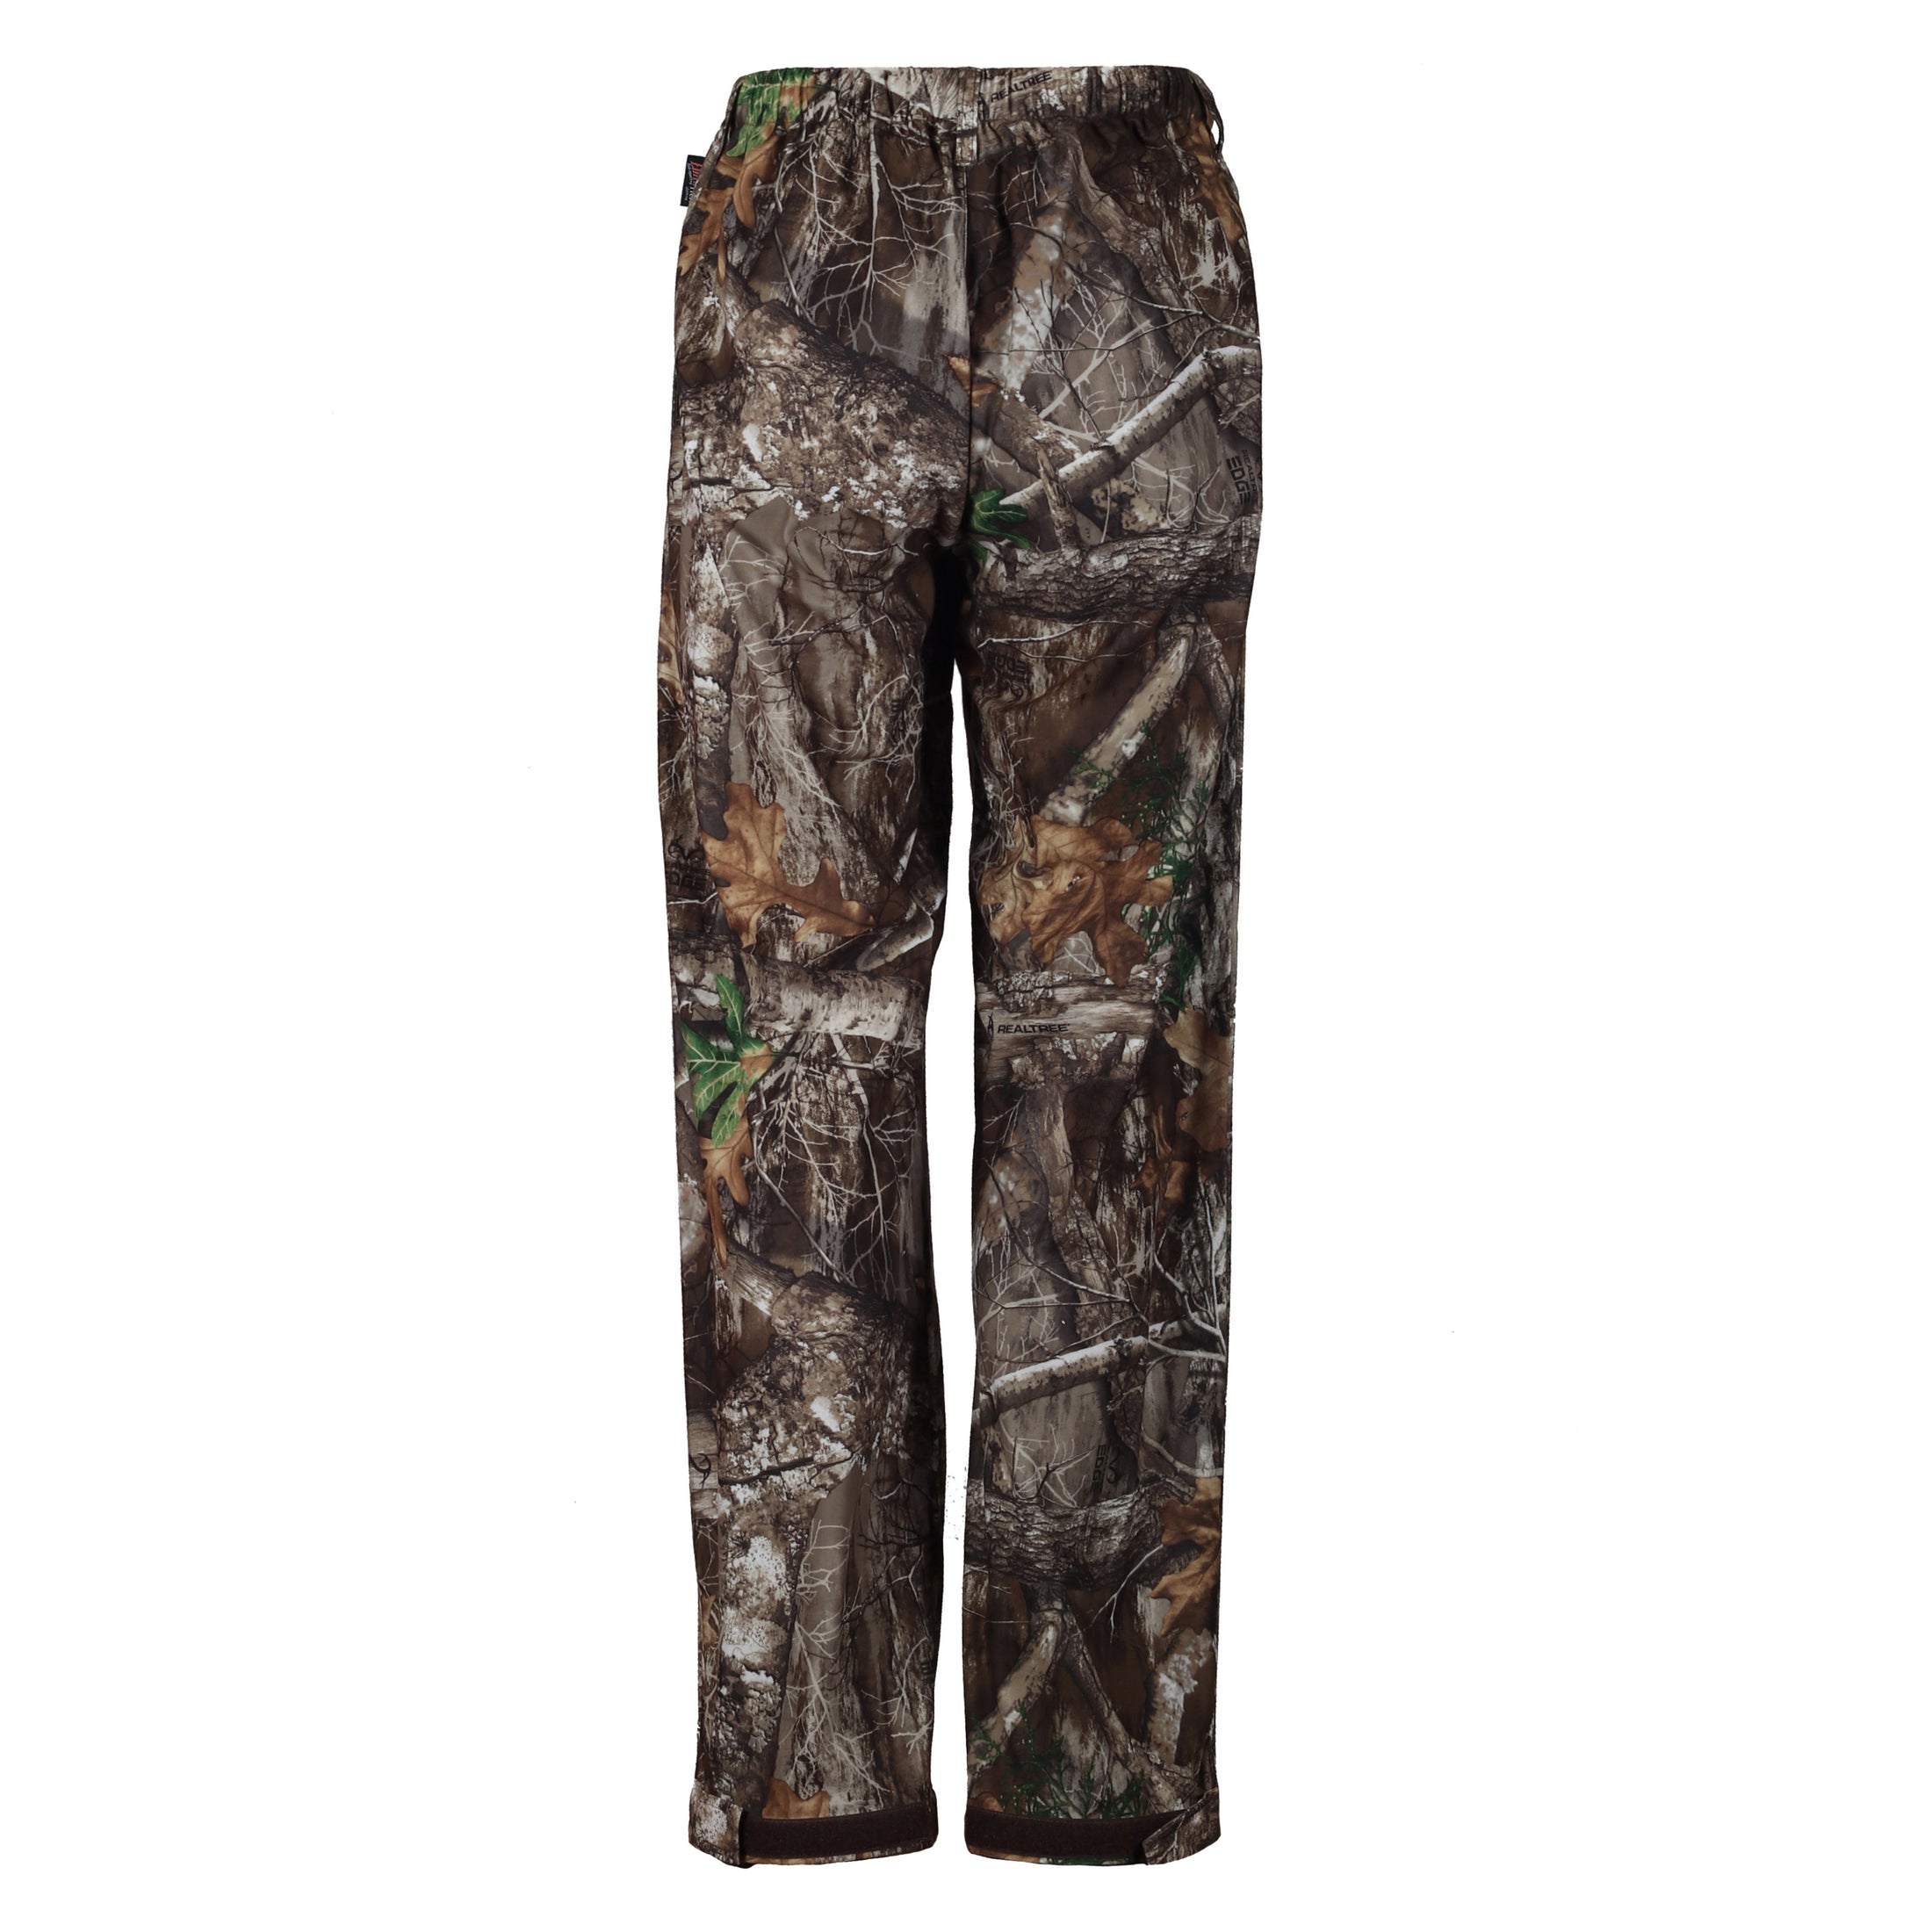 gamehdie ElimiTick Insect Repellent Cover Up Pant back (realtree edge)